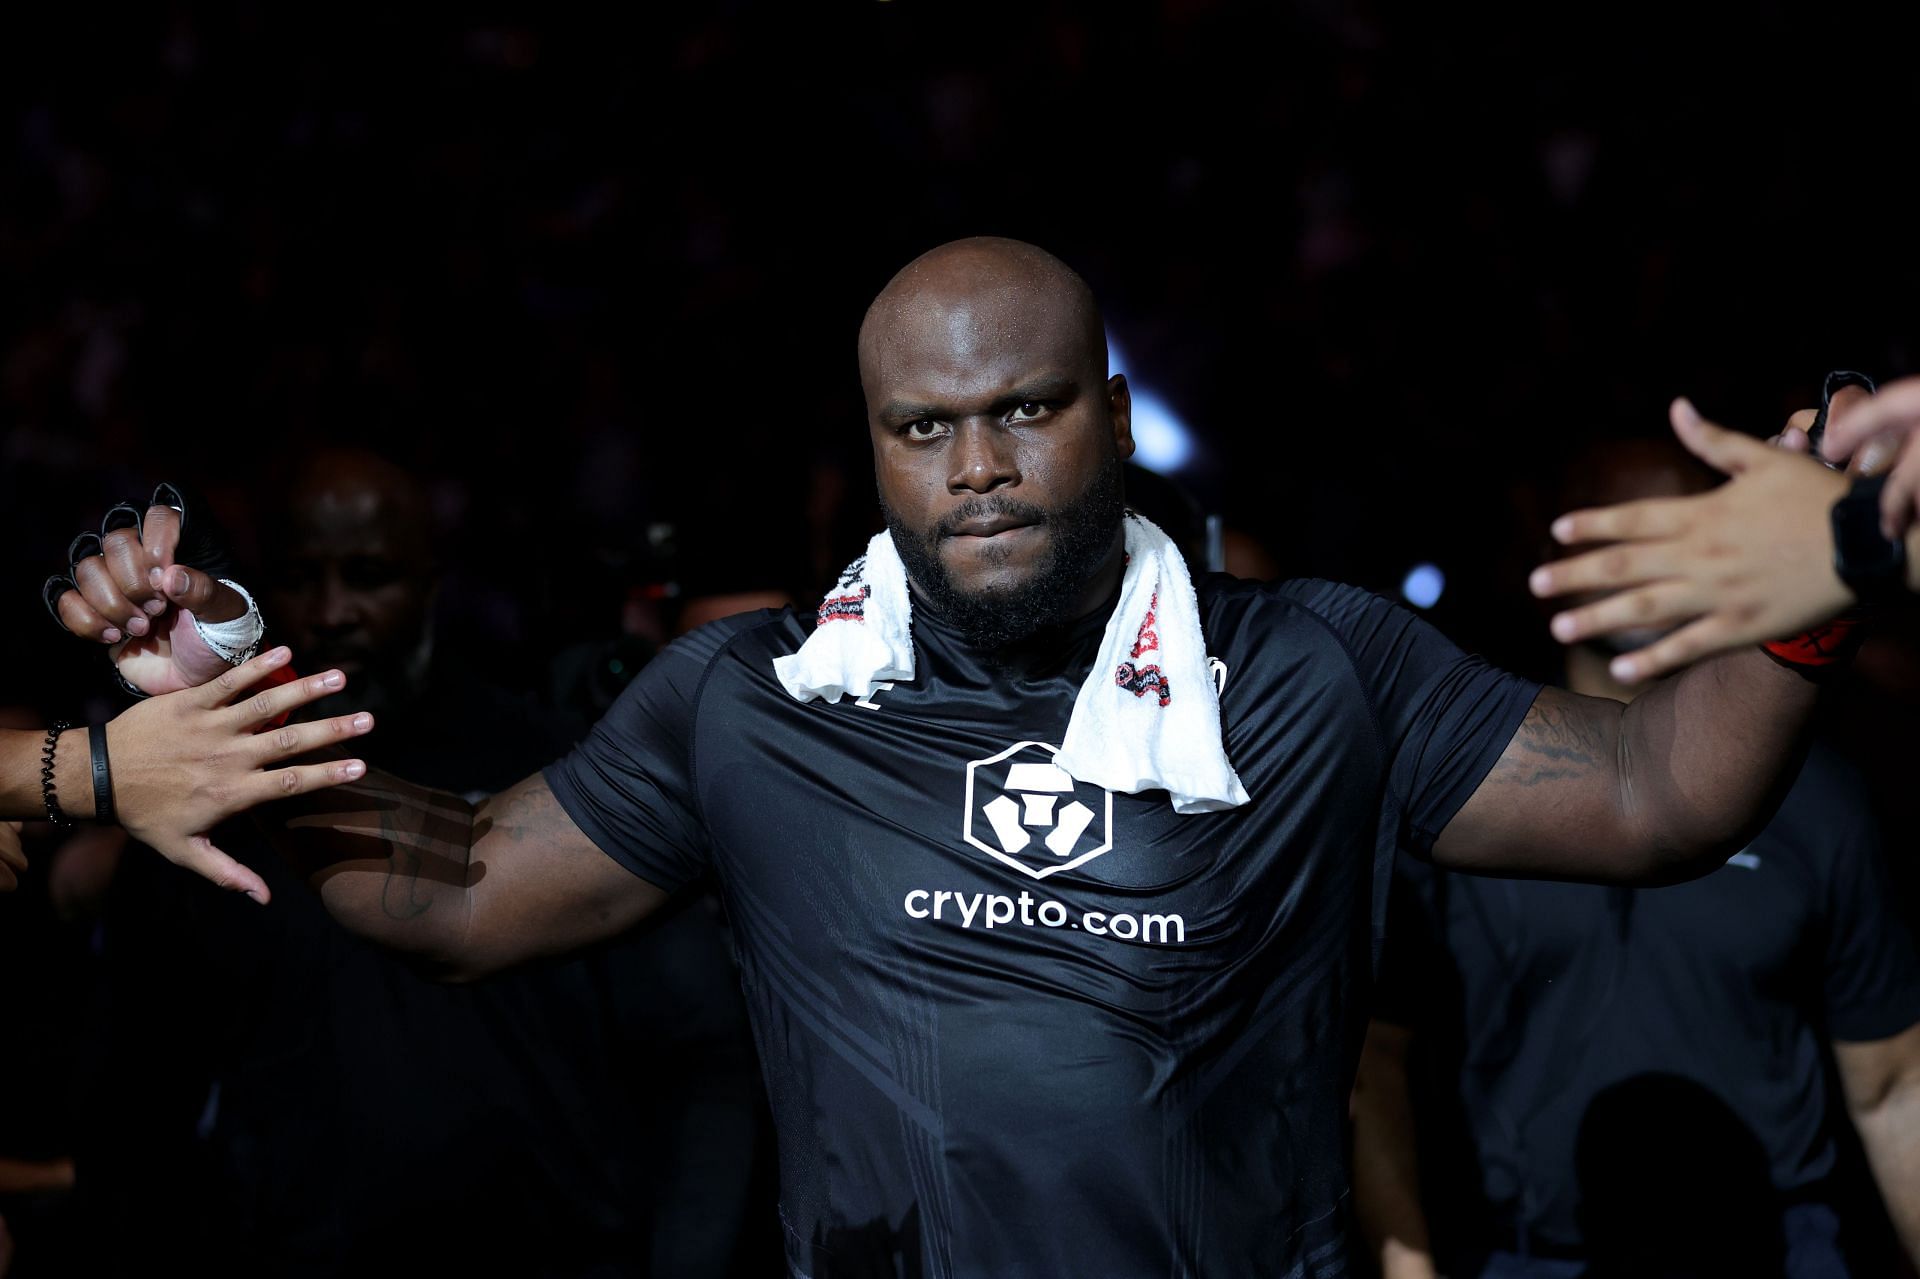 Derrick Lewis holds the record for most knockouts in UFC history